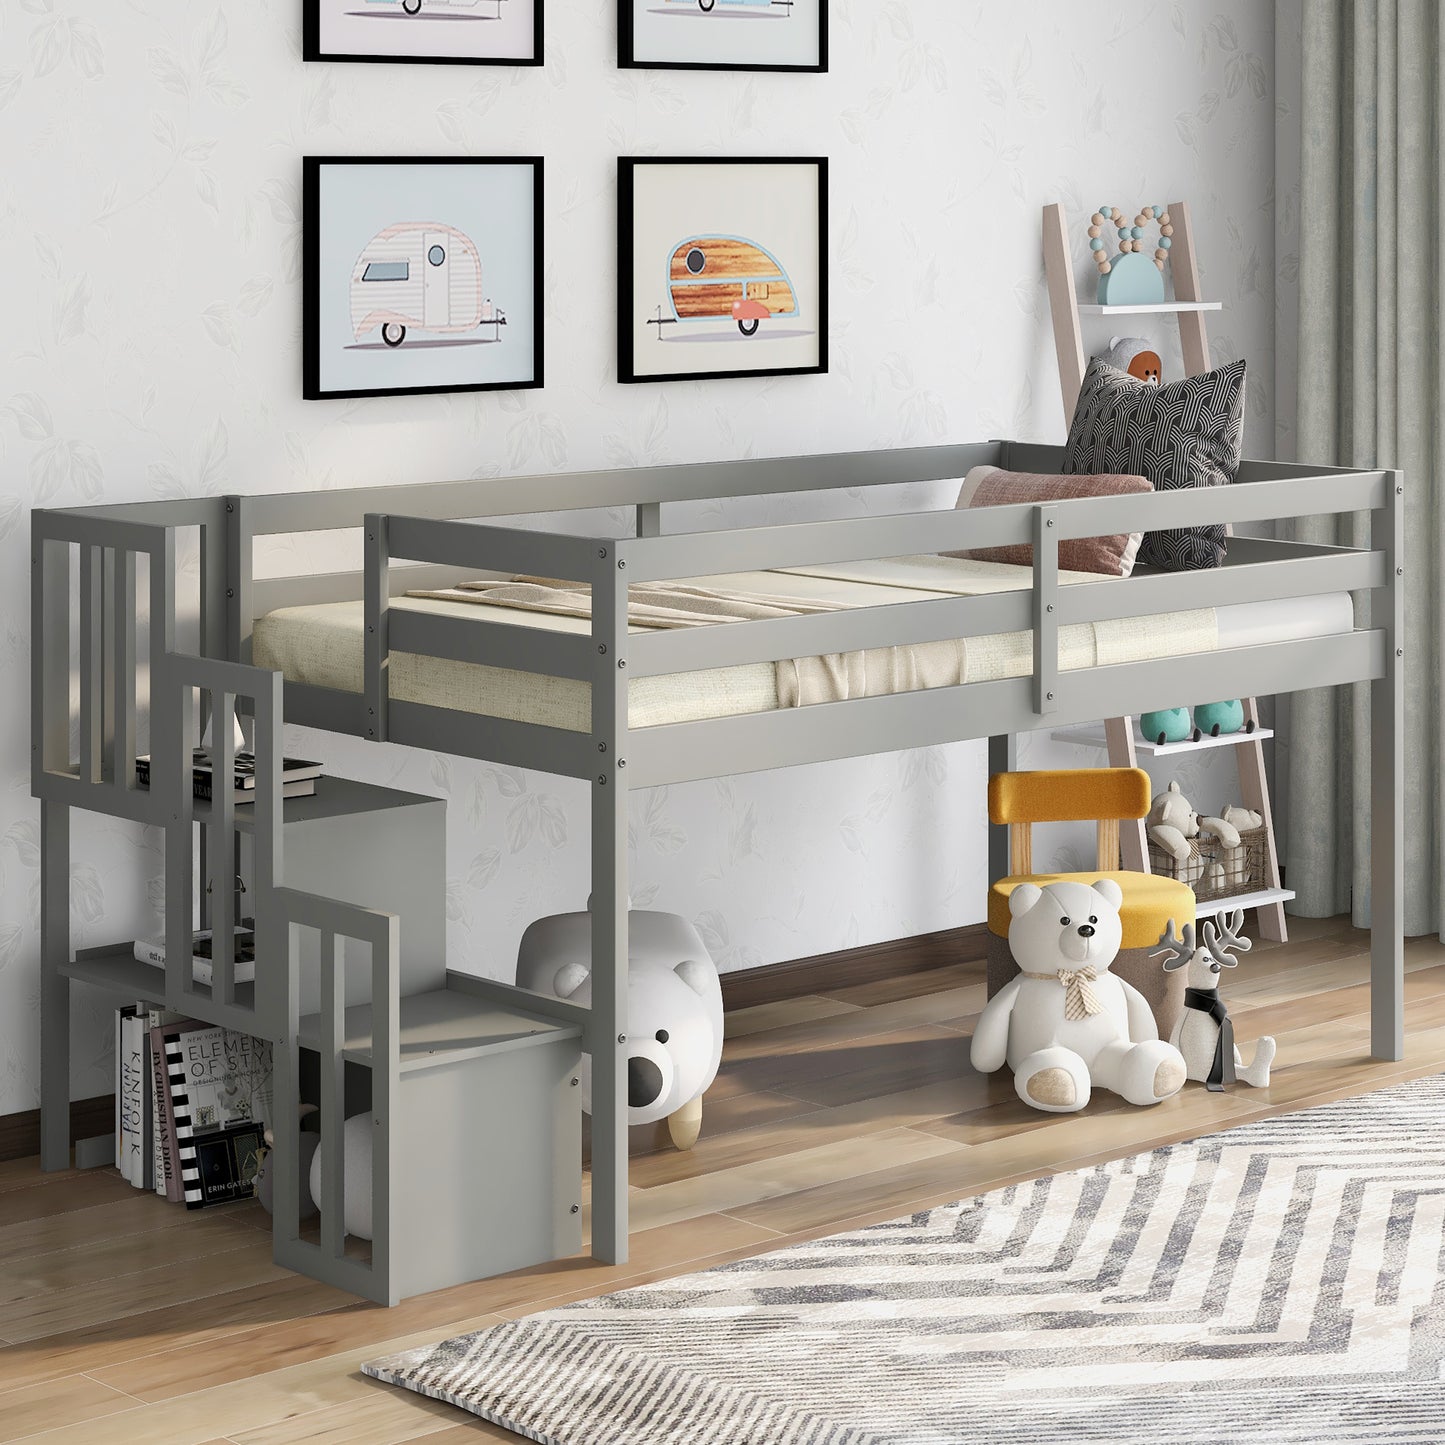 SYNGAR Twin Size Kids Loft Bed with Stairs, Wood Toddler Bunk Bed for Boys Girls Teens Adults, Twin Bed Frame with Storage, Low Profile Loft Bed for Kids Bedroom, Gray